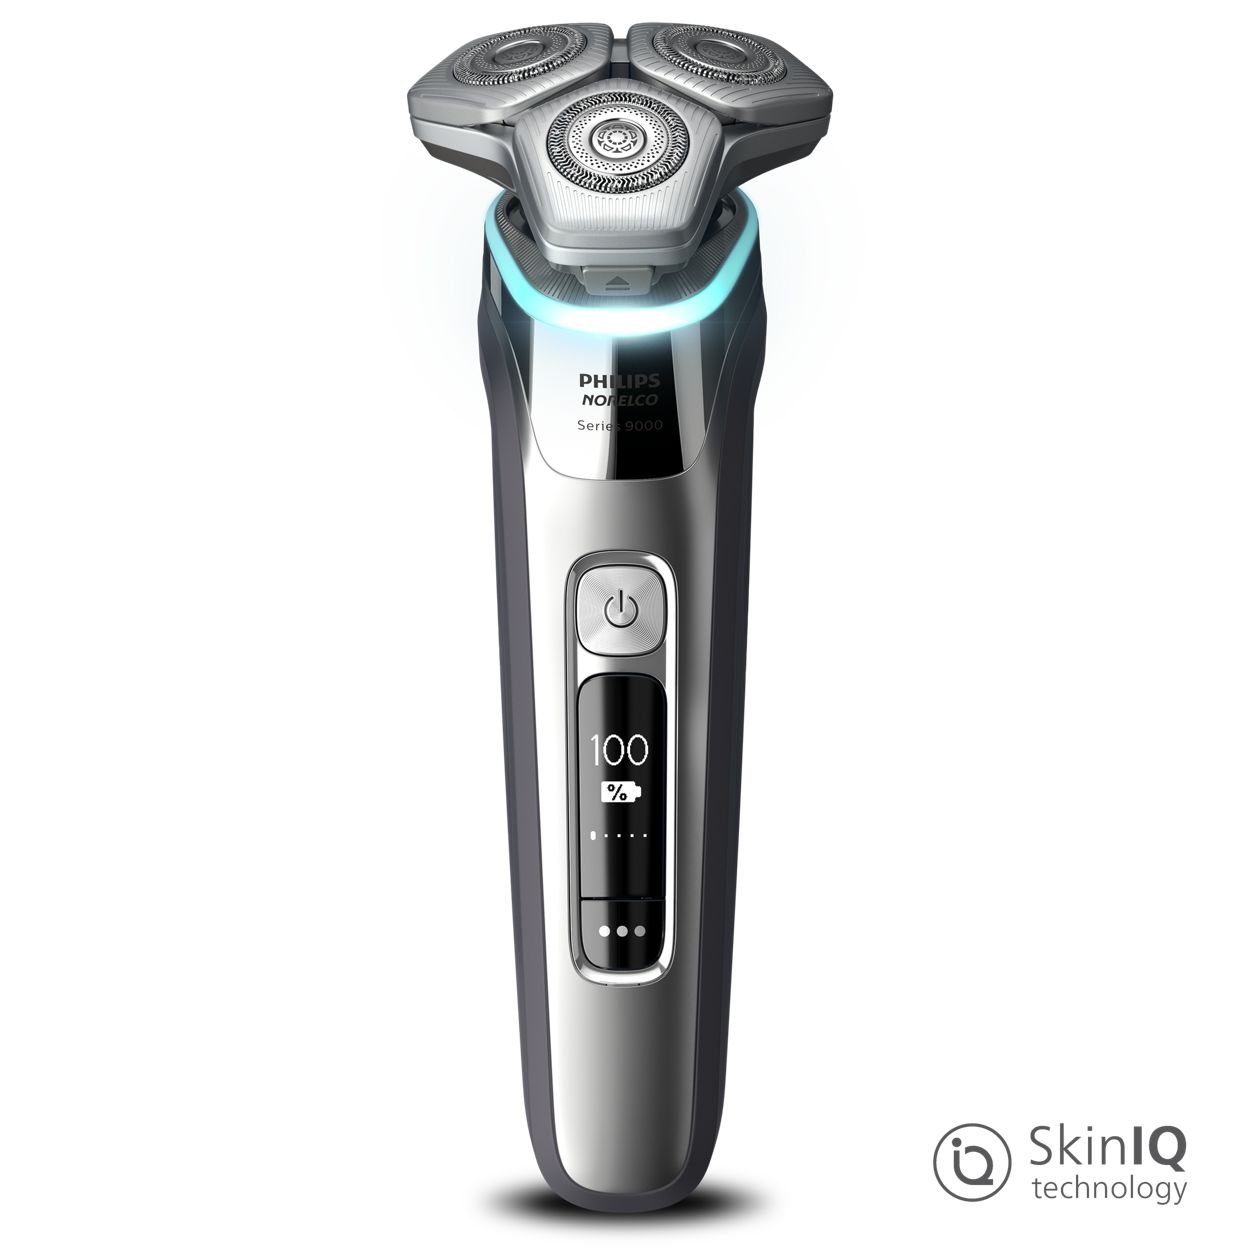 Philips Norelco 9500 Rechargeable Wet/Dry Electric Shaver with